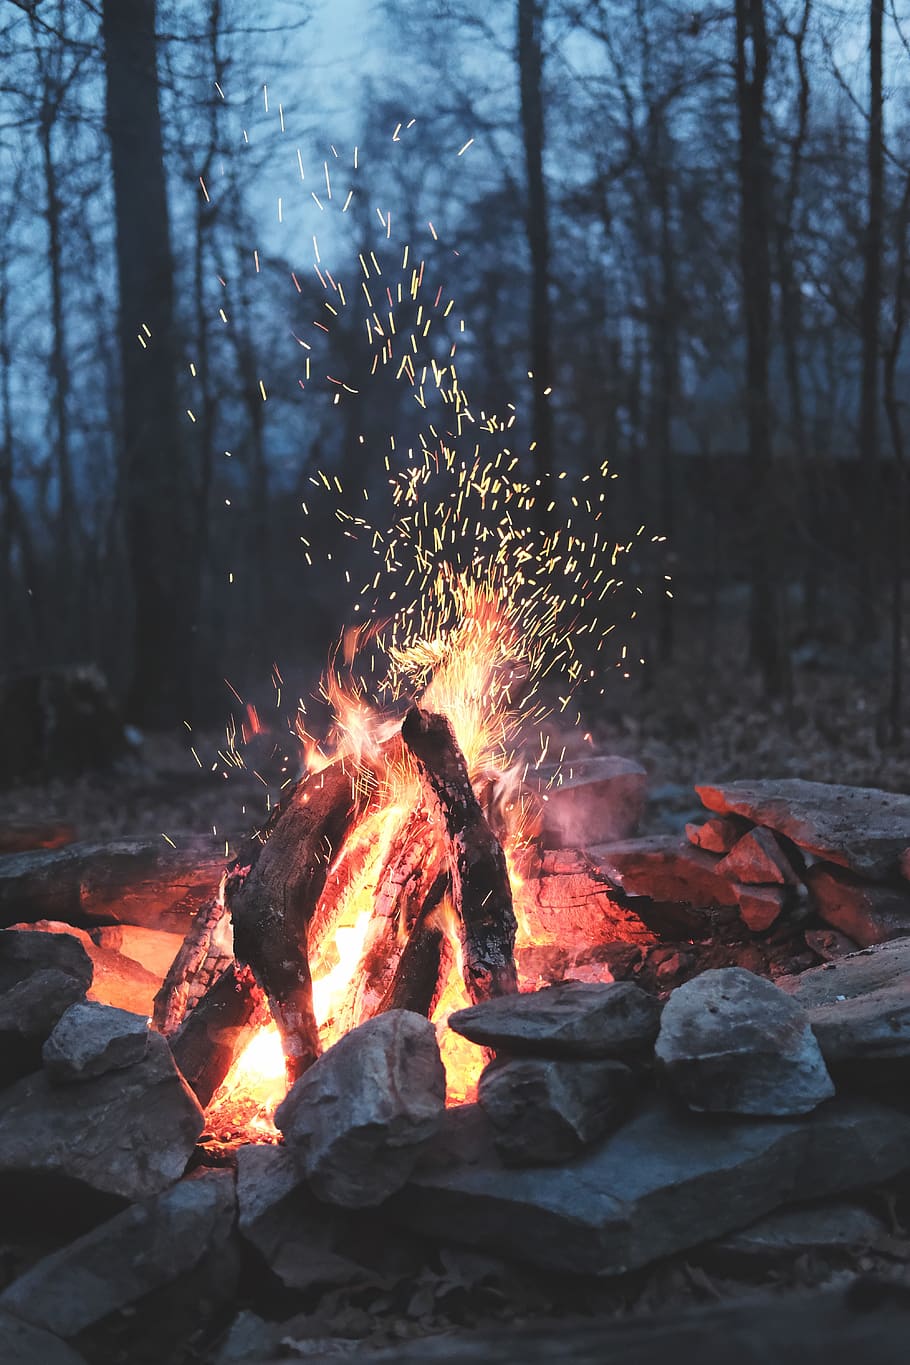 nature, fire, bonfire, camp, outdoor, woods, forest, spark, stone, wood